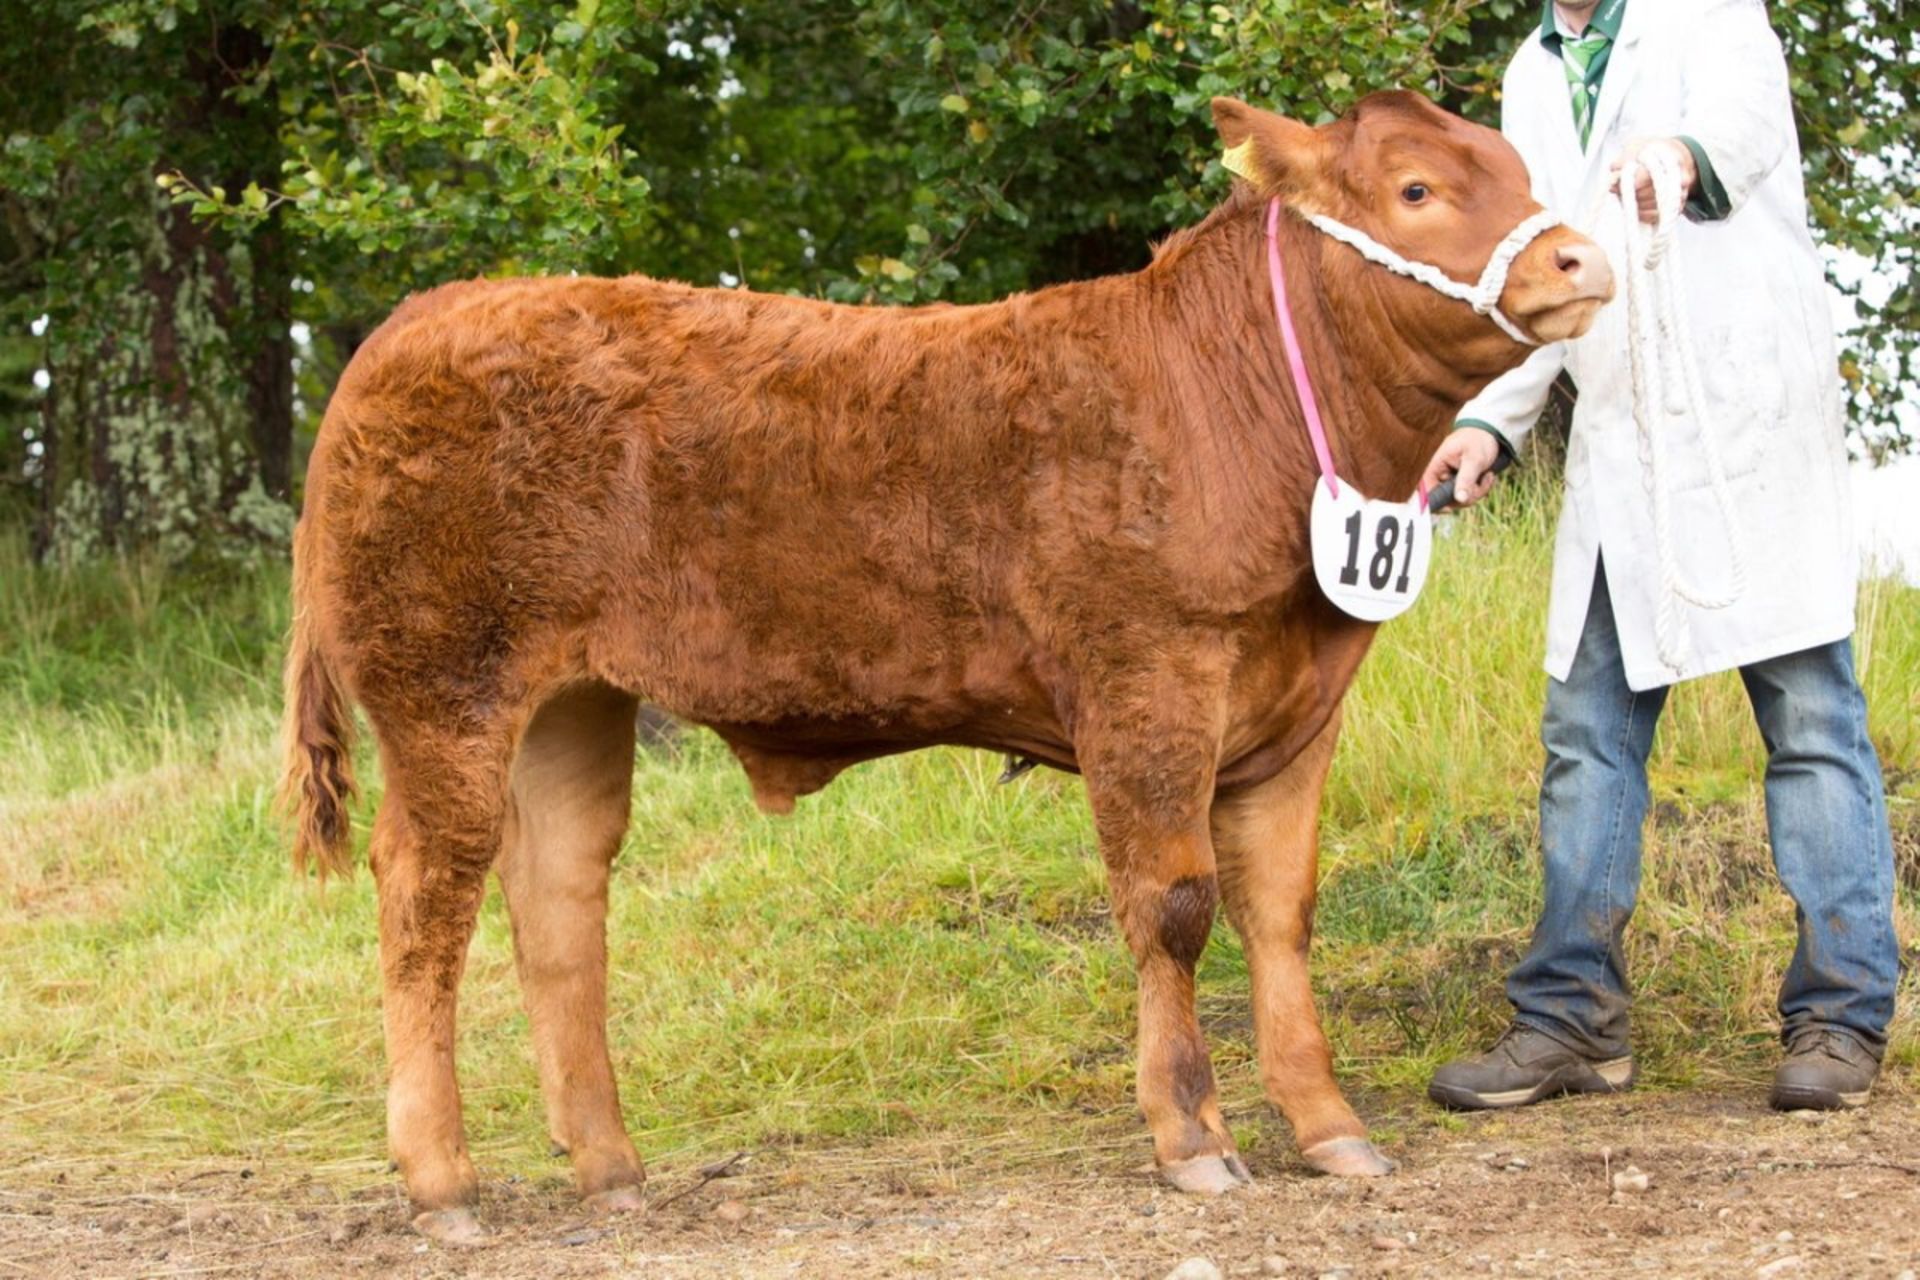 Limousin Cross - Steer, - DOB: 1st March 2016, - Ear Tag:UK521182 600111 was Preview No: 5005